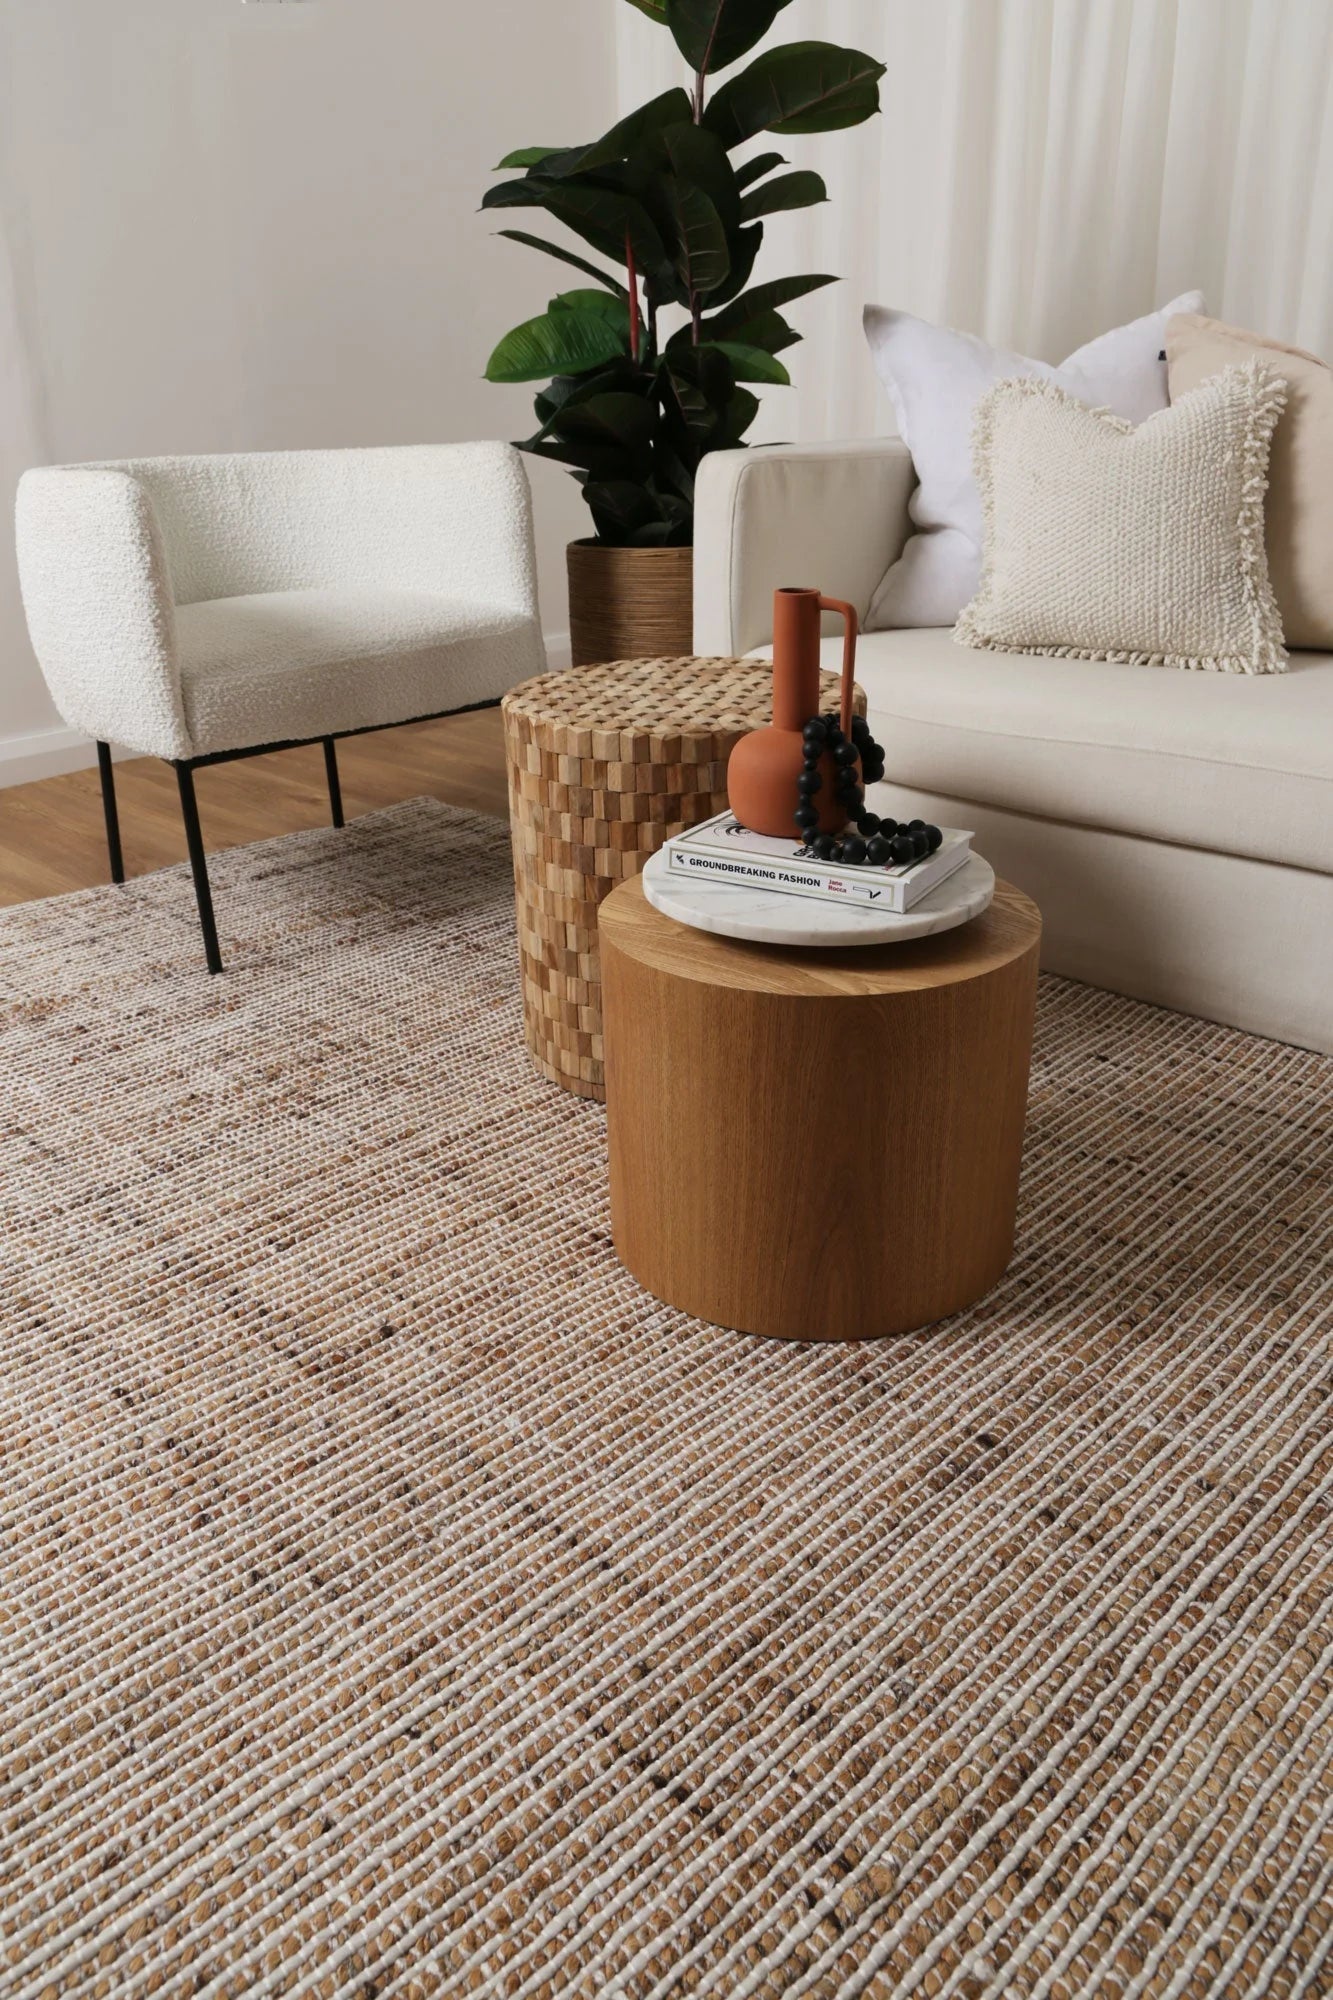 Dune Ivory Rug displayed in a room with neutral decor, accentuating its versatility and natural aesthetic.